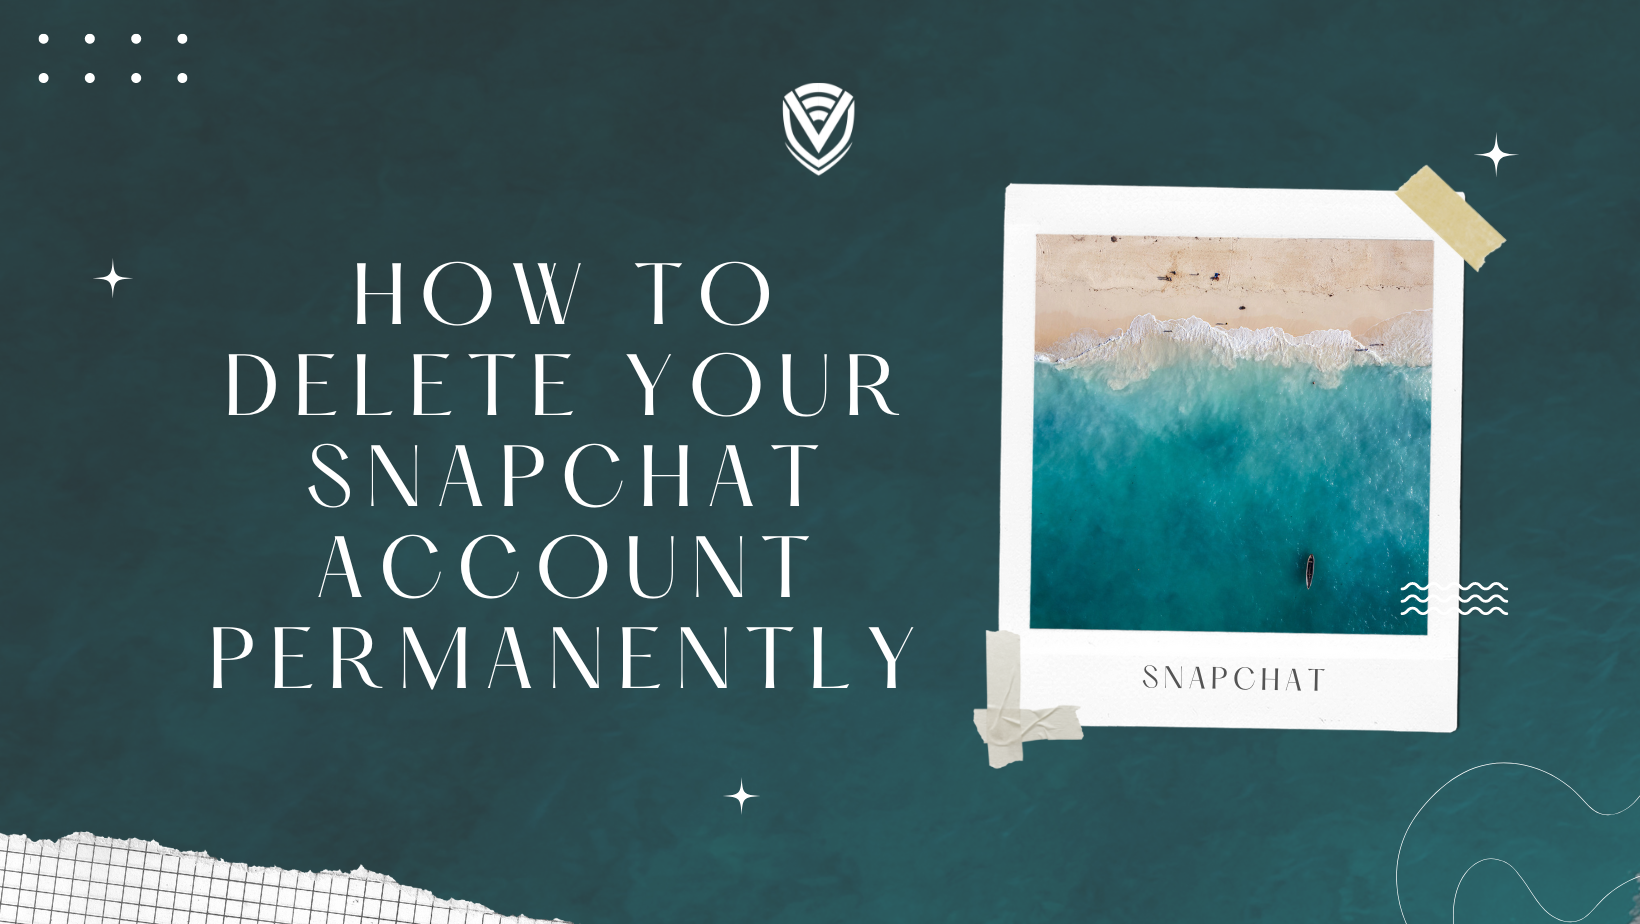 How To Delete Your Snapchat Account Permanently